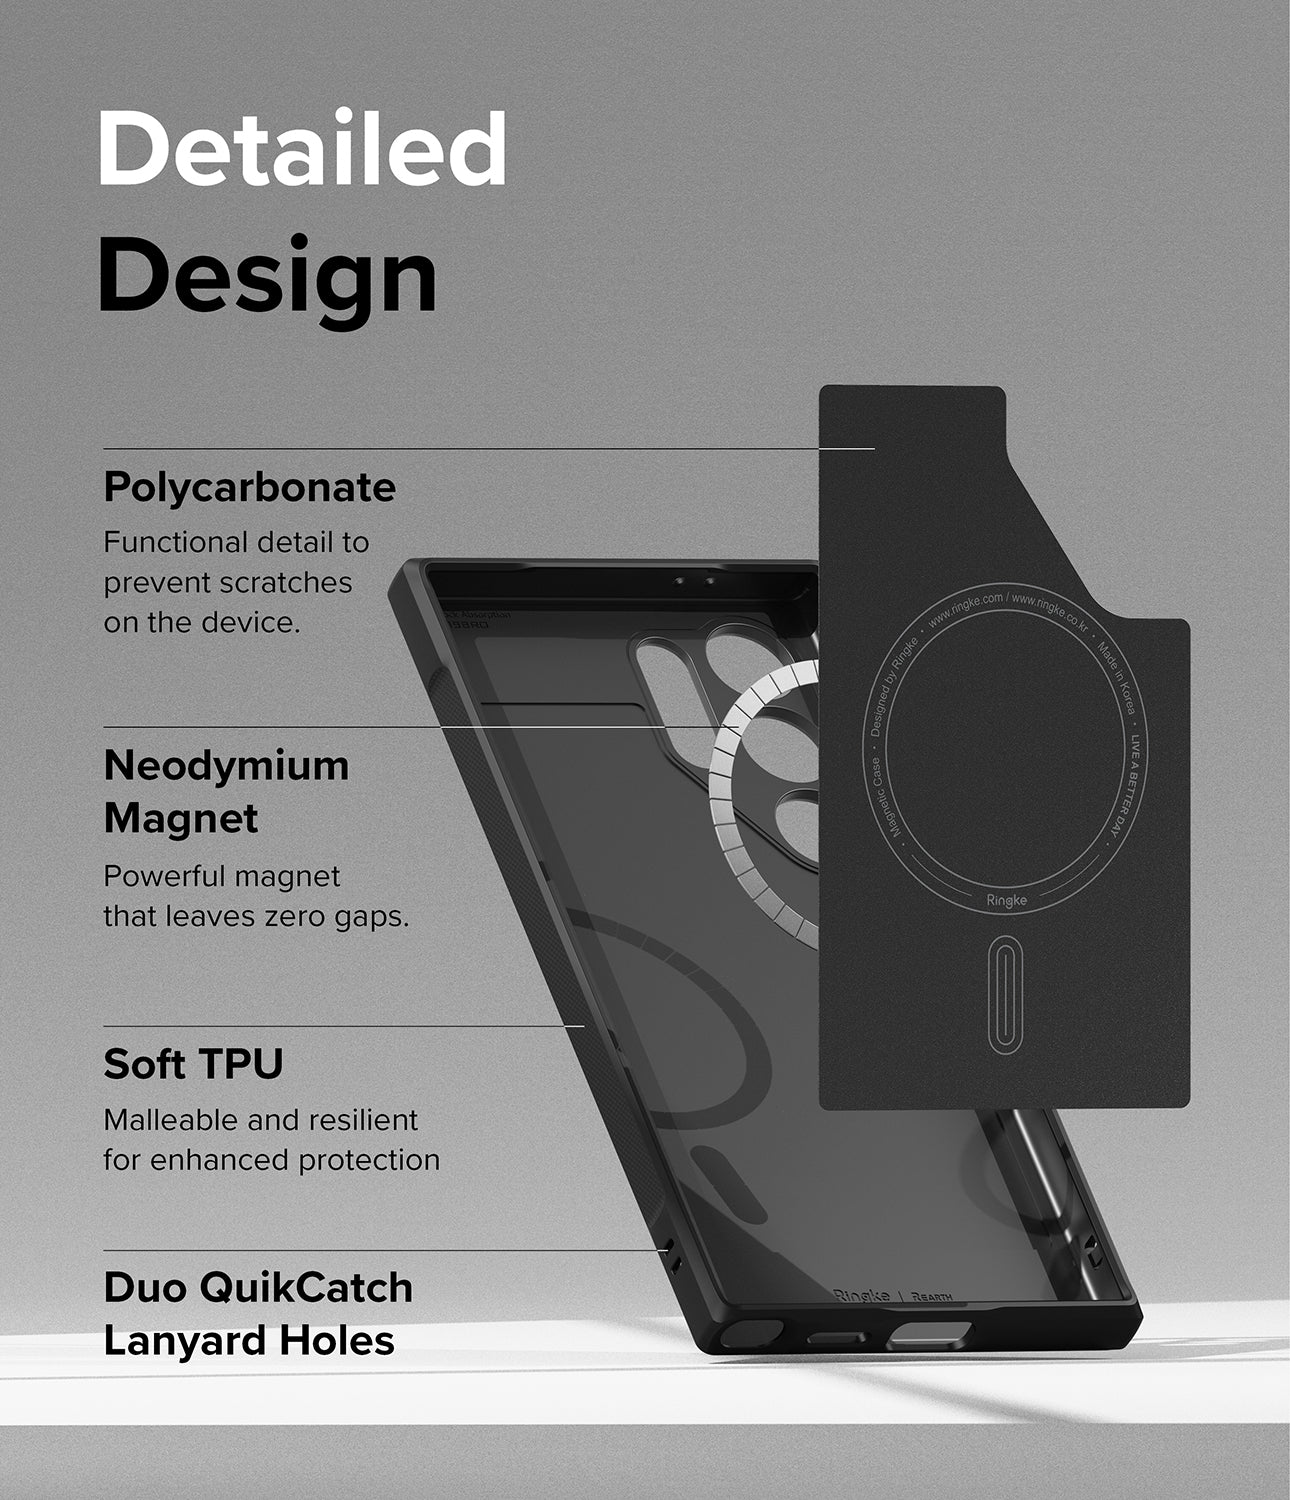 Galaxy S24 Ultra Case | Onyx Magnetic - Detailed Design. Functional detail to prevent scratches on the device with Polycarbonate. Powerful neodymium magnet that leaves zero gaps. Malleable and resilient for enhanced protection with Soft TPU. Duo QuikCatch Lanyard Holes.